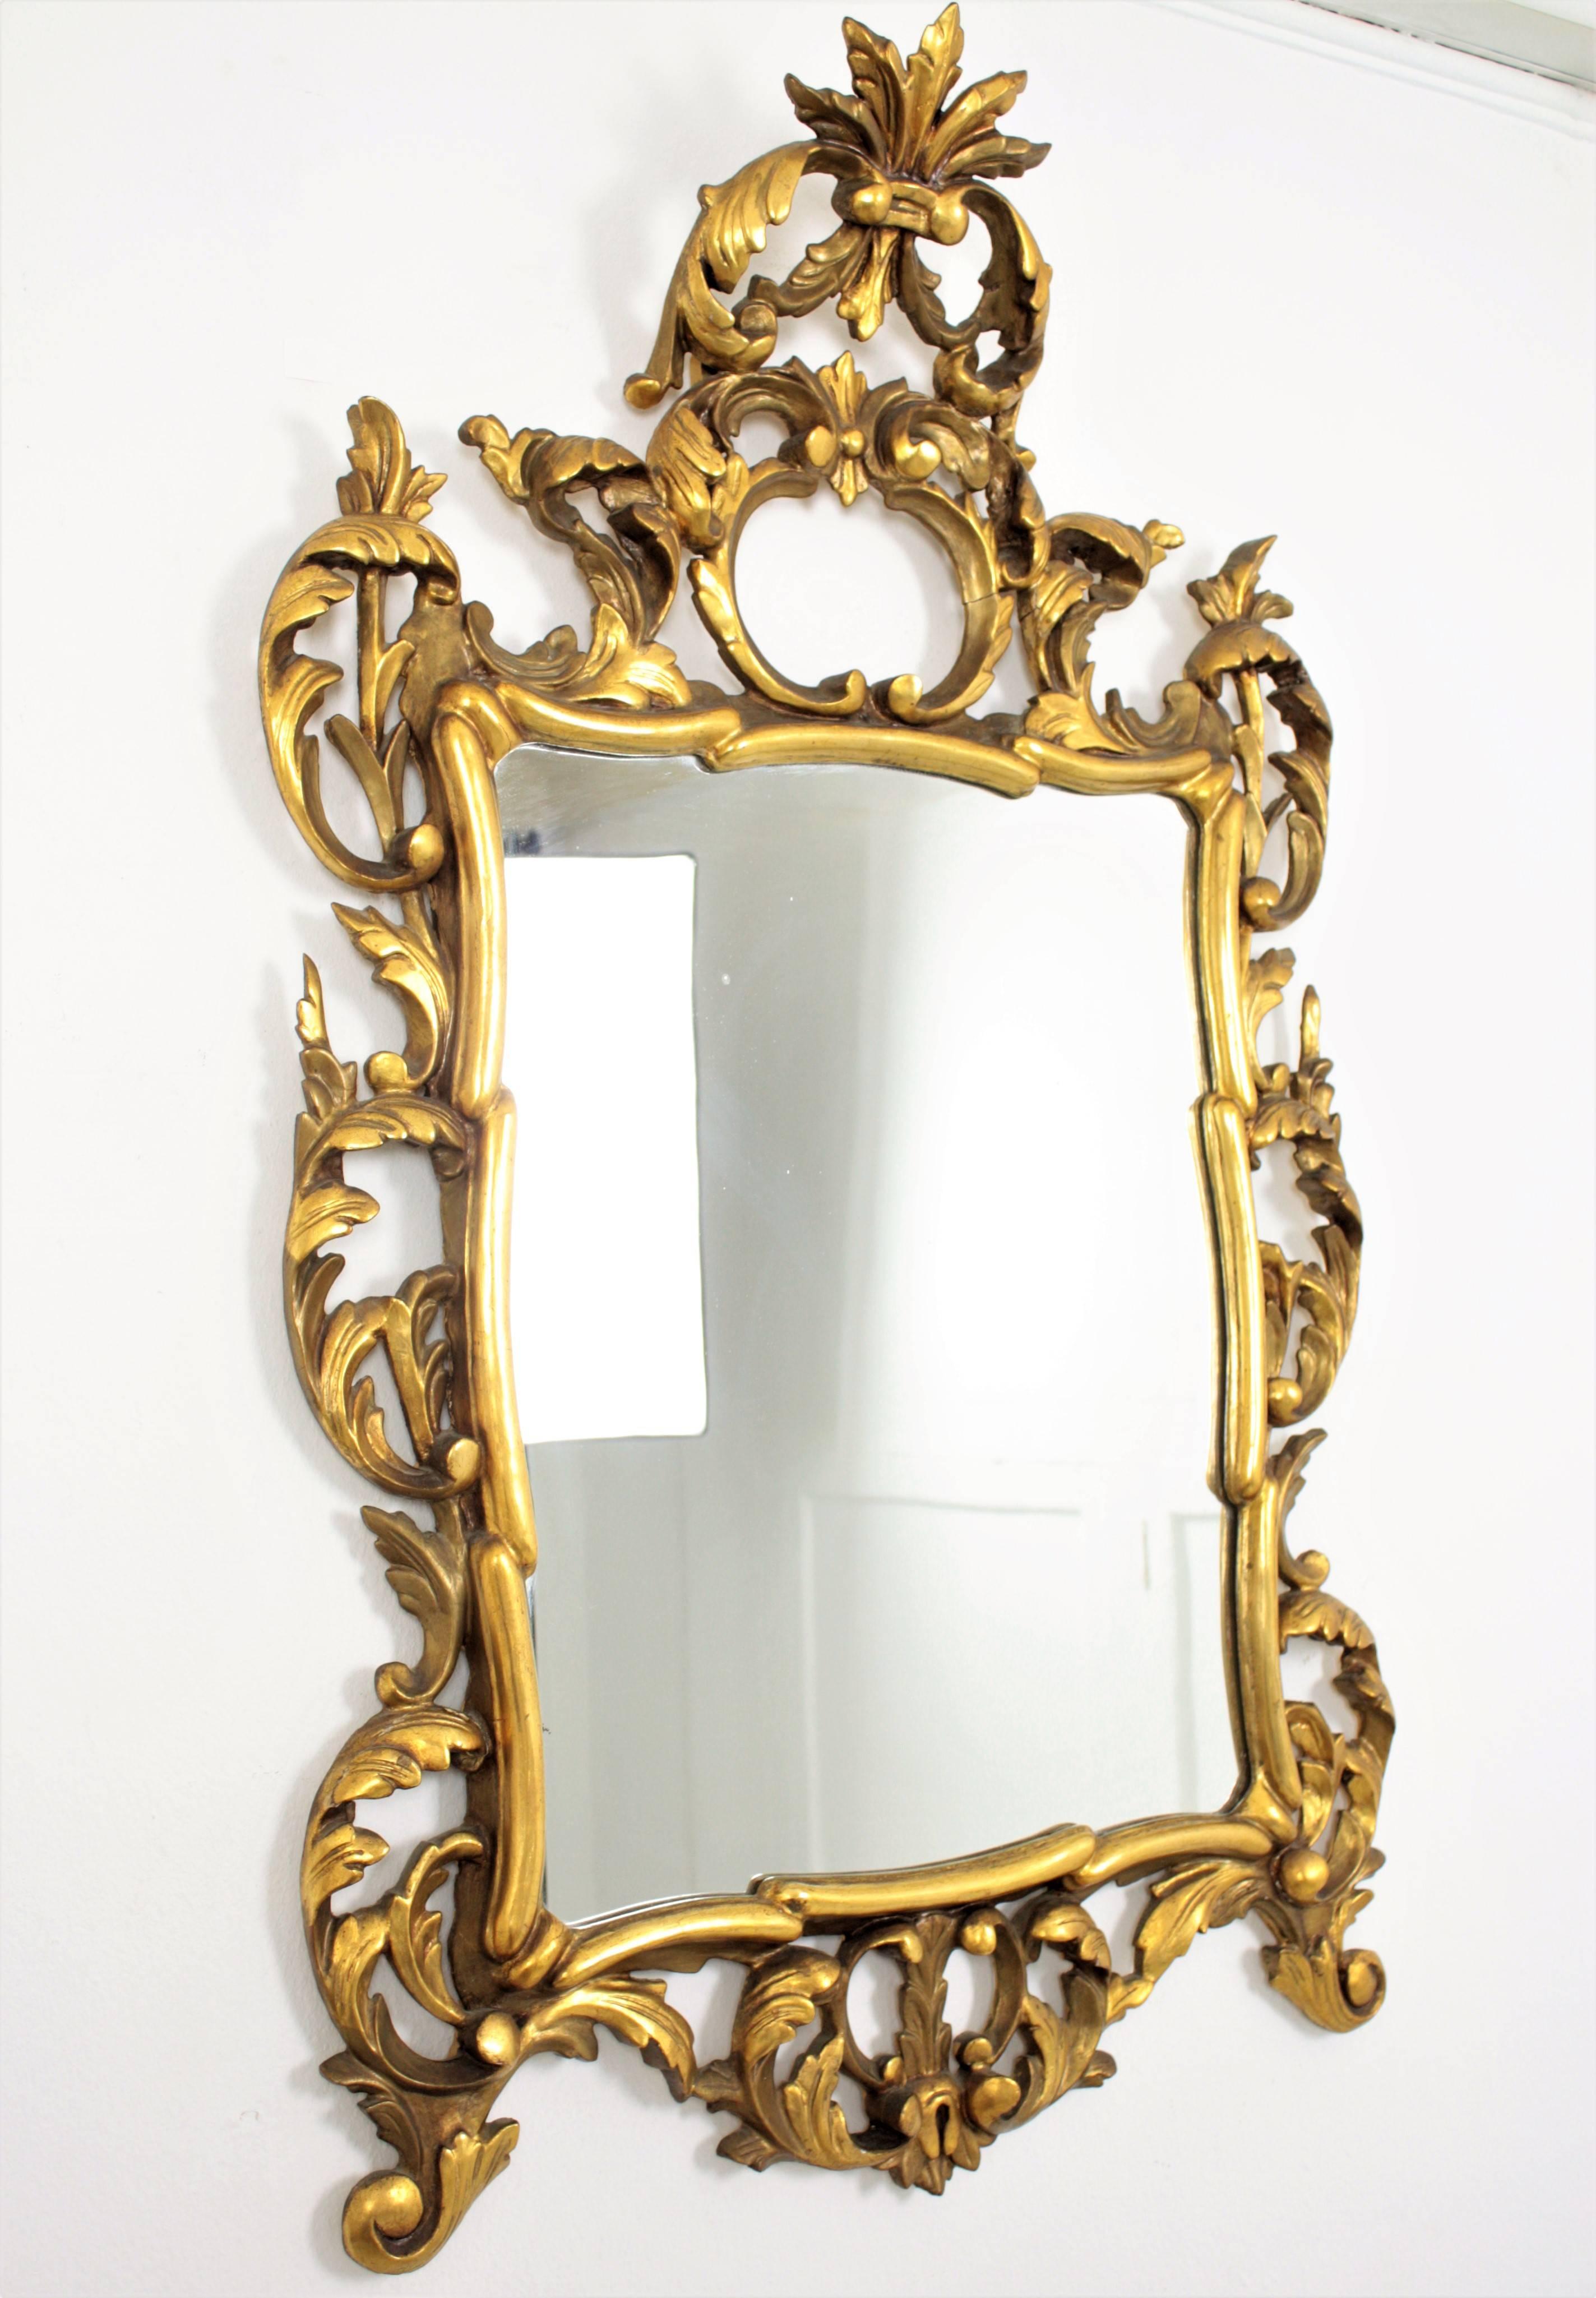 A finely carved and highly decorative Rococo style mirror with gold leaf finish and beautiful original patina. Frame with details of scrolled acanthus leaves and an important carved crest,
Spain, circa 1890.

Avaliable a huge collection of